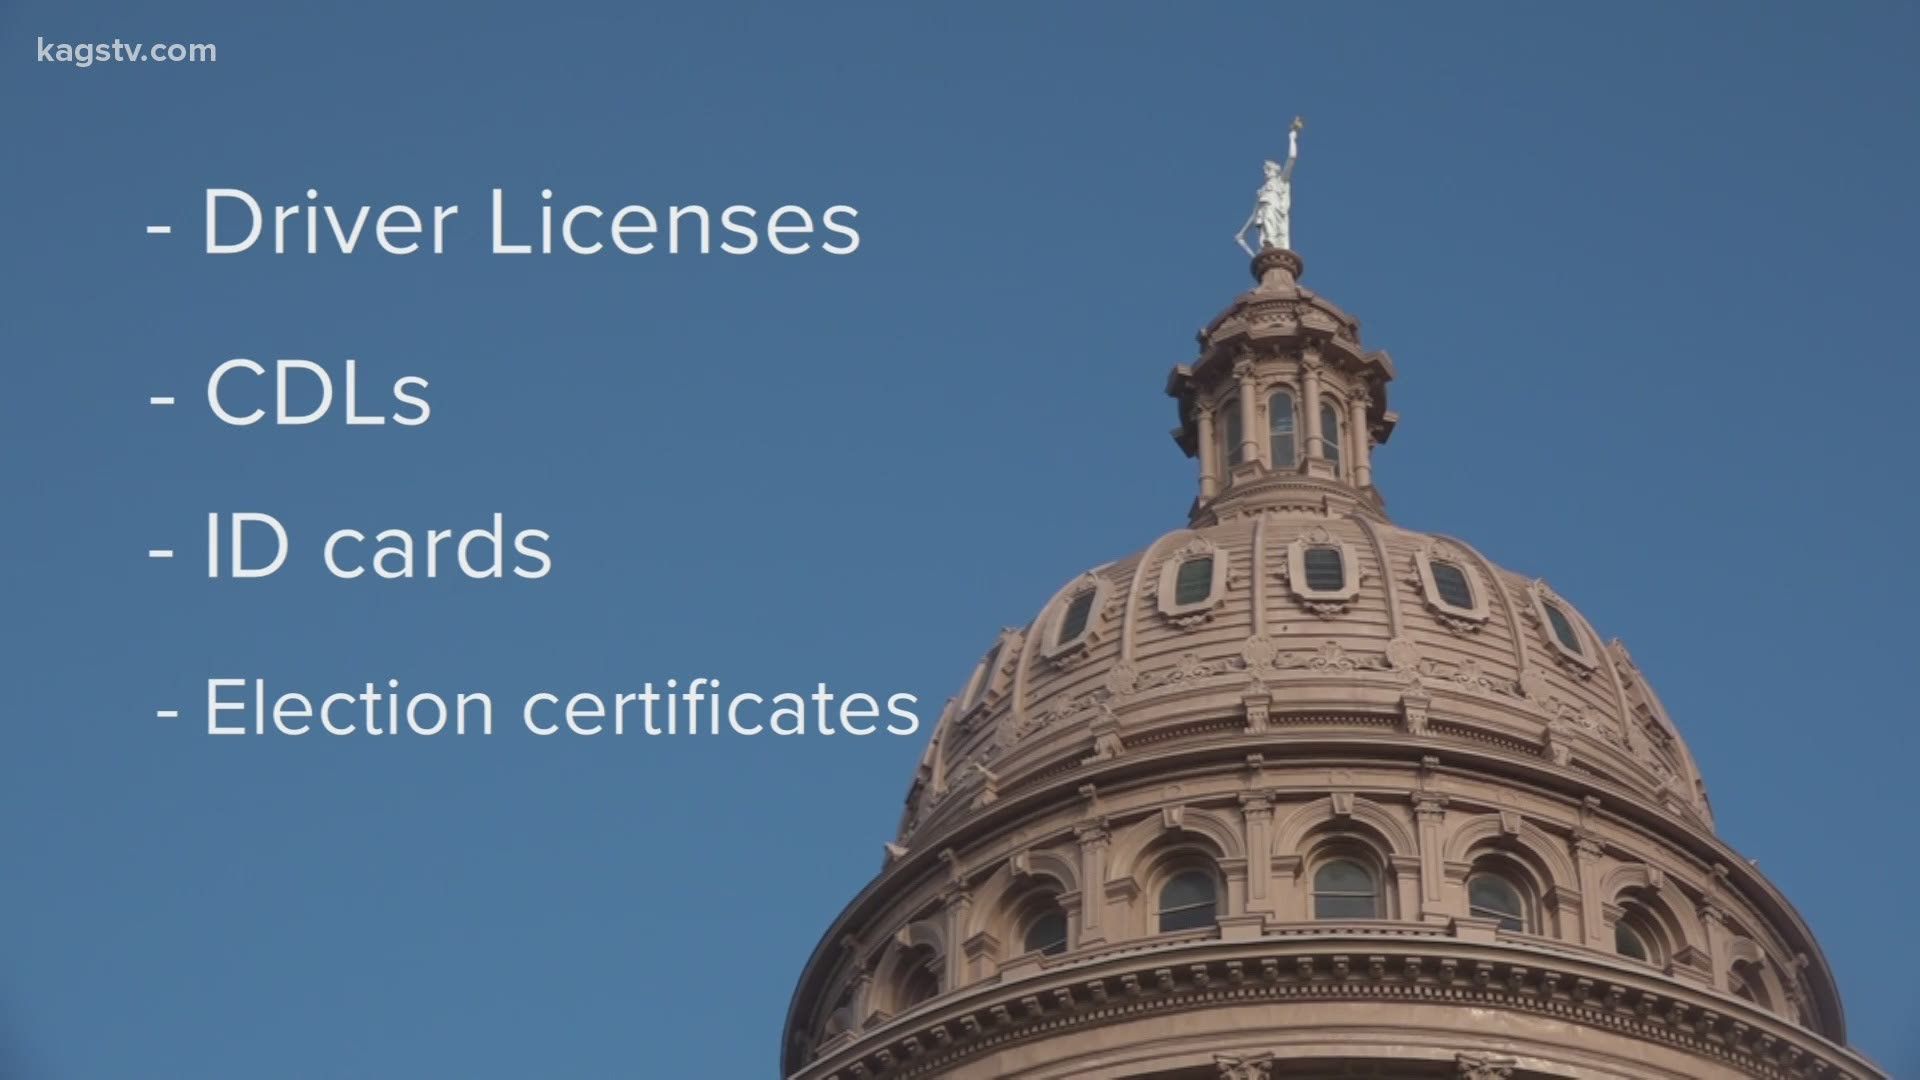 Starting Tuesday, May 26, 2020, Texas driver license offices will phase in opening for services like applying for a driver license or skill-based tests.